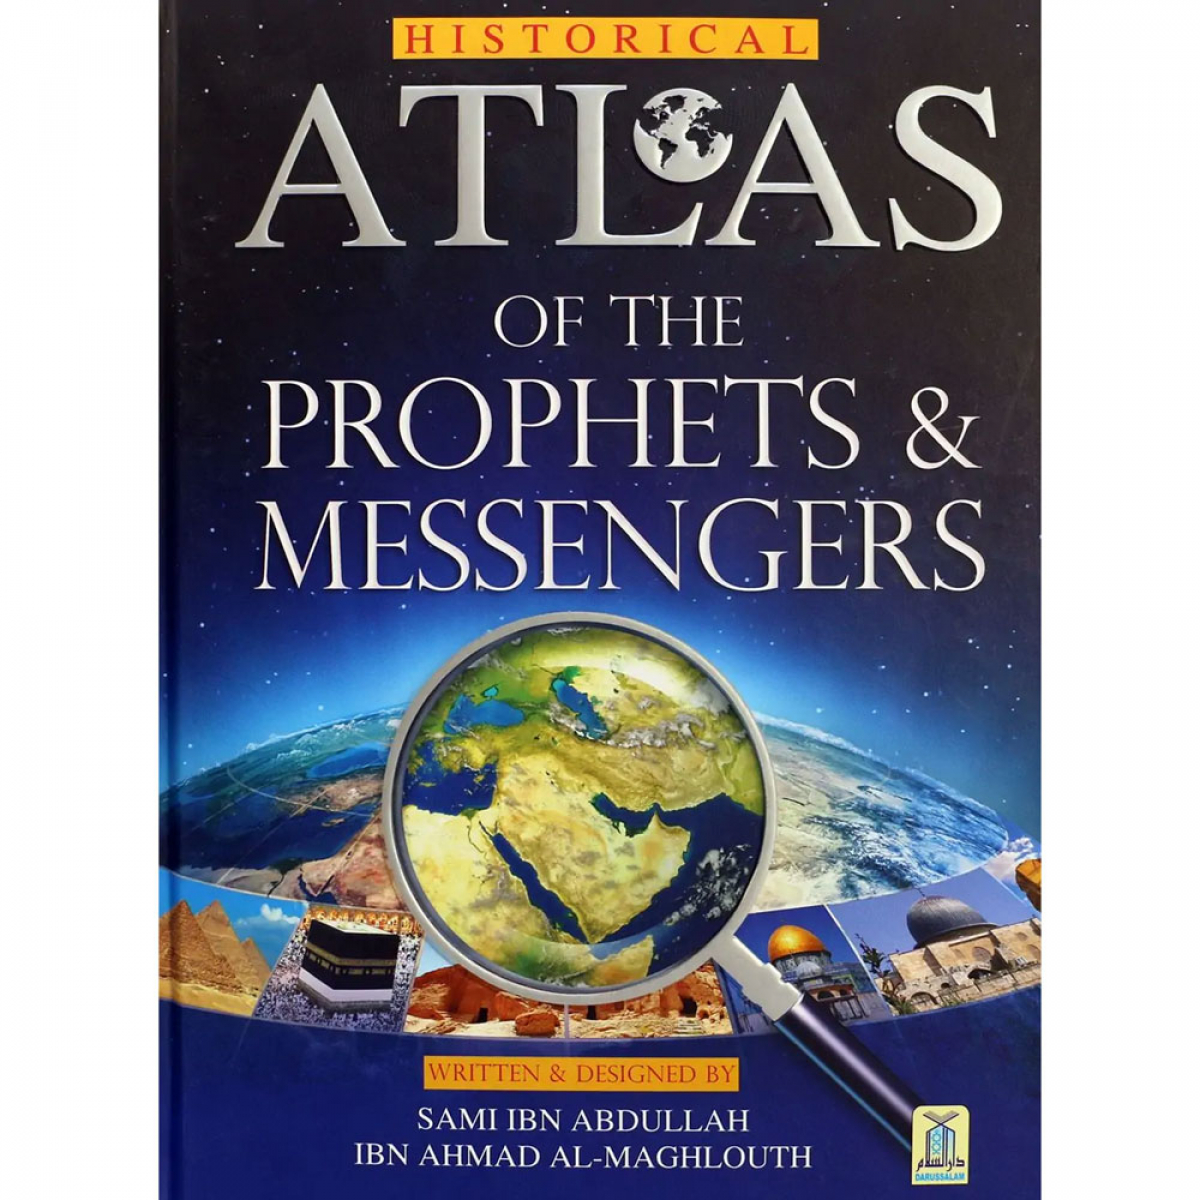 Historical Atlas of The Prophets & Messengers